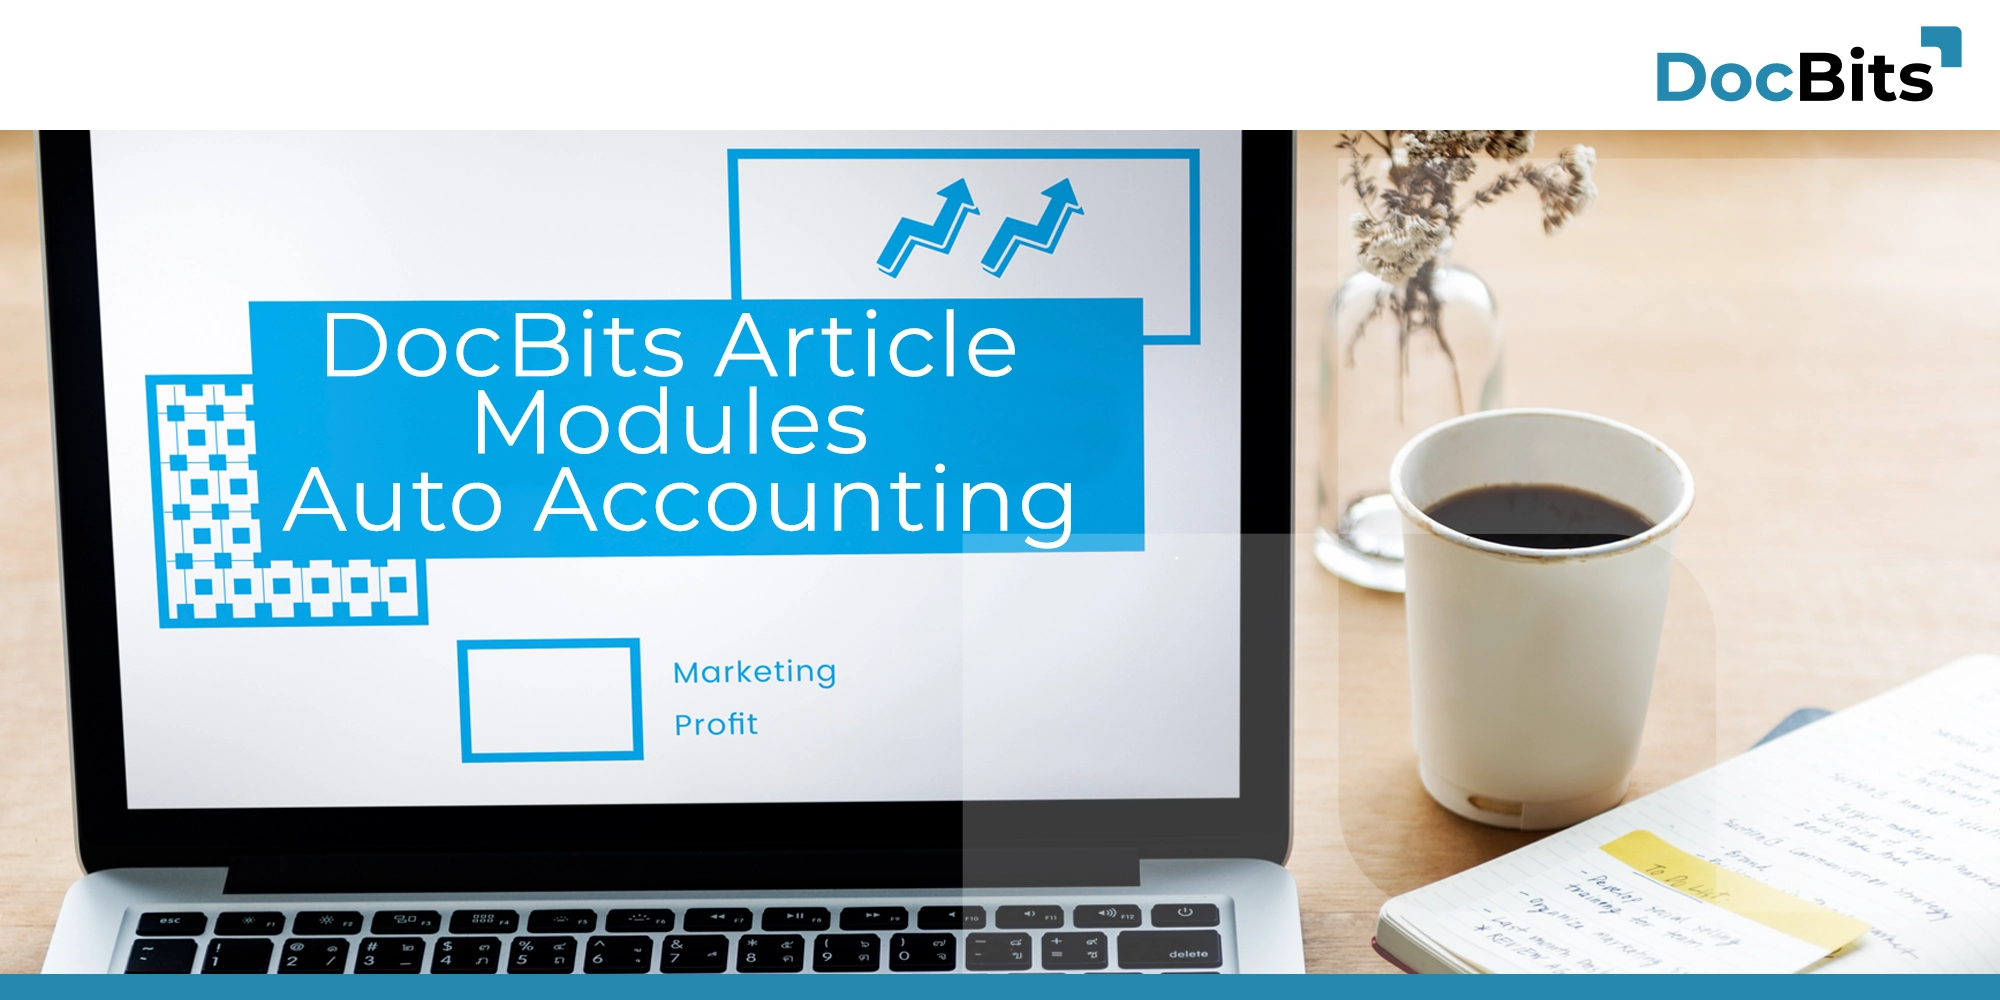 DocBits Article Modules Auto Accounting